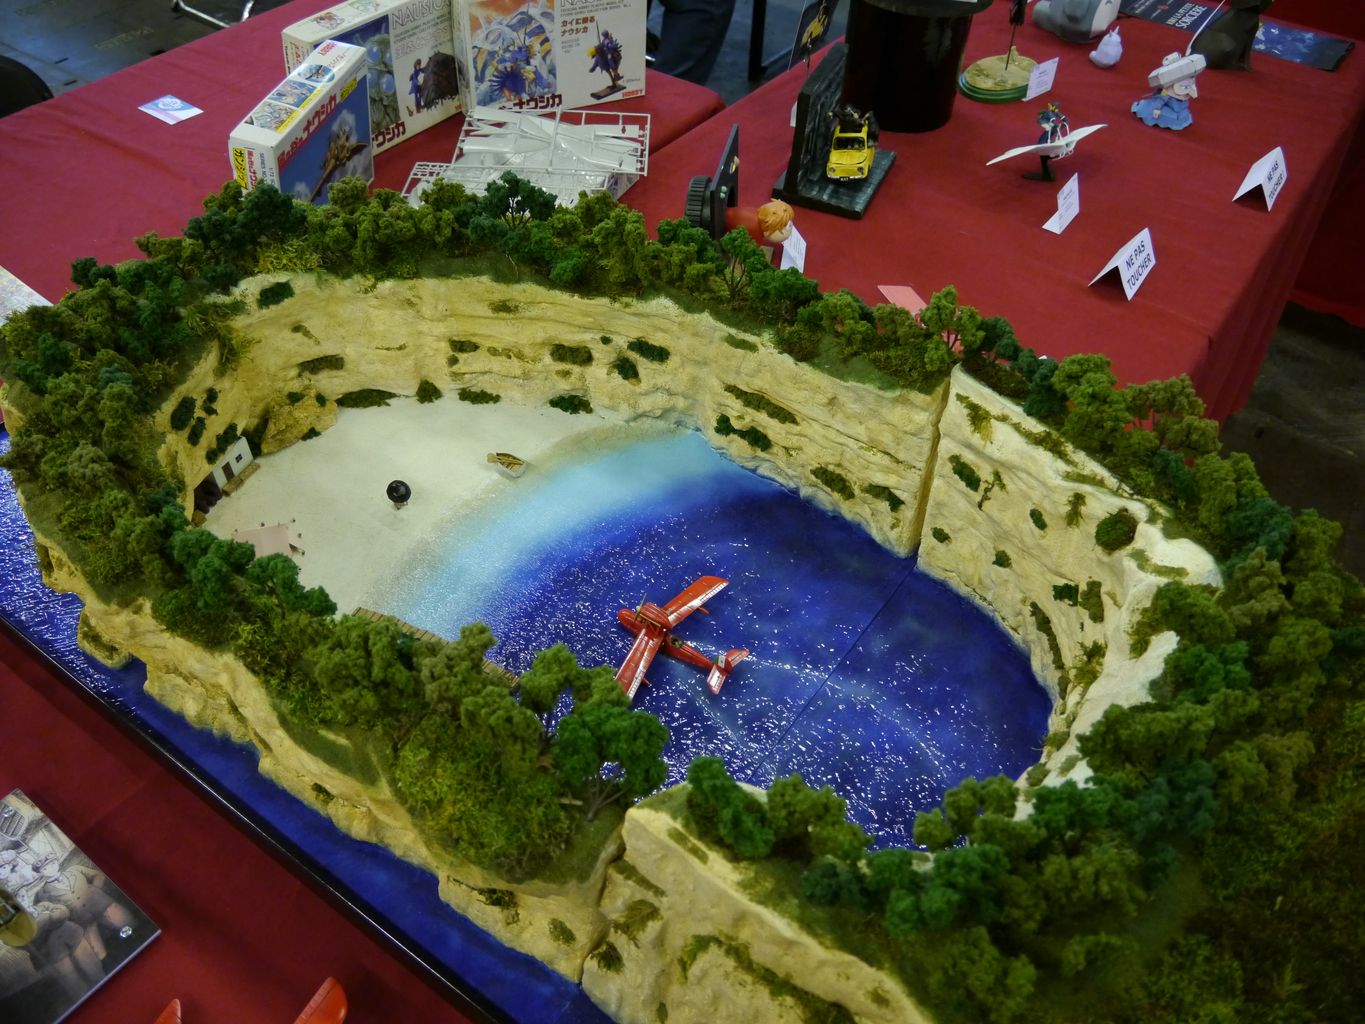 Japan EXPO 2014 in Paris: Anigetter exhibition Photoreport! Gunpla and Others! Enjoy ...1365 x 1024